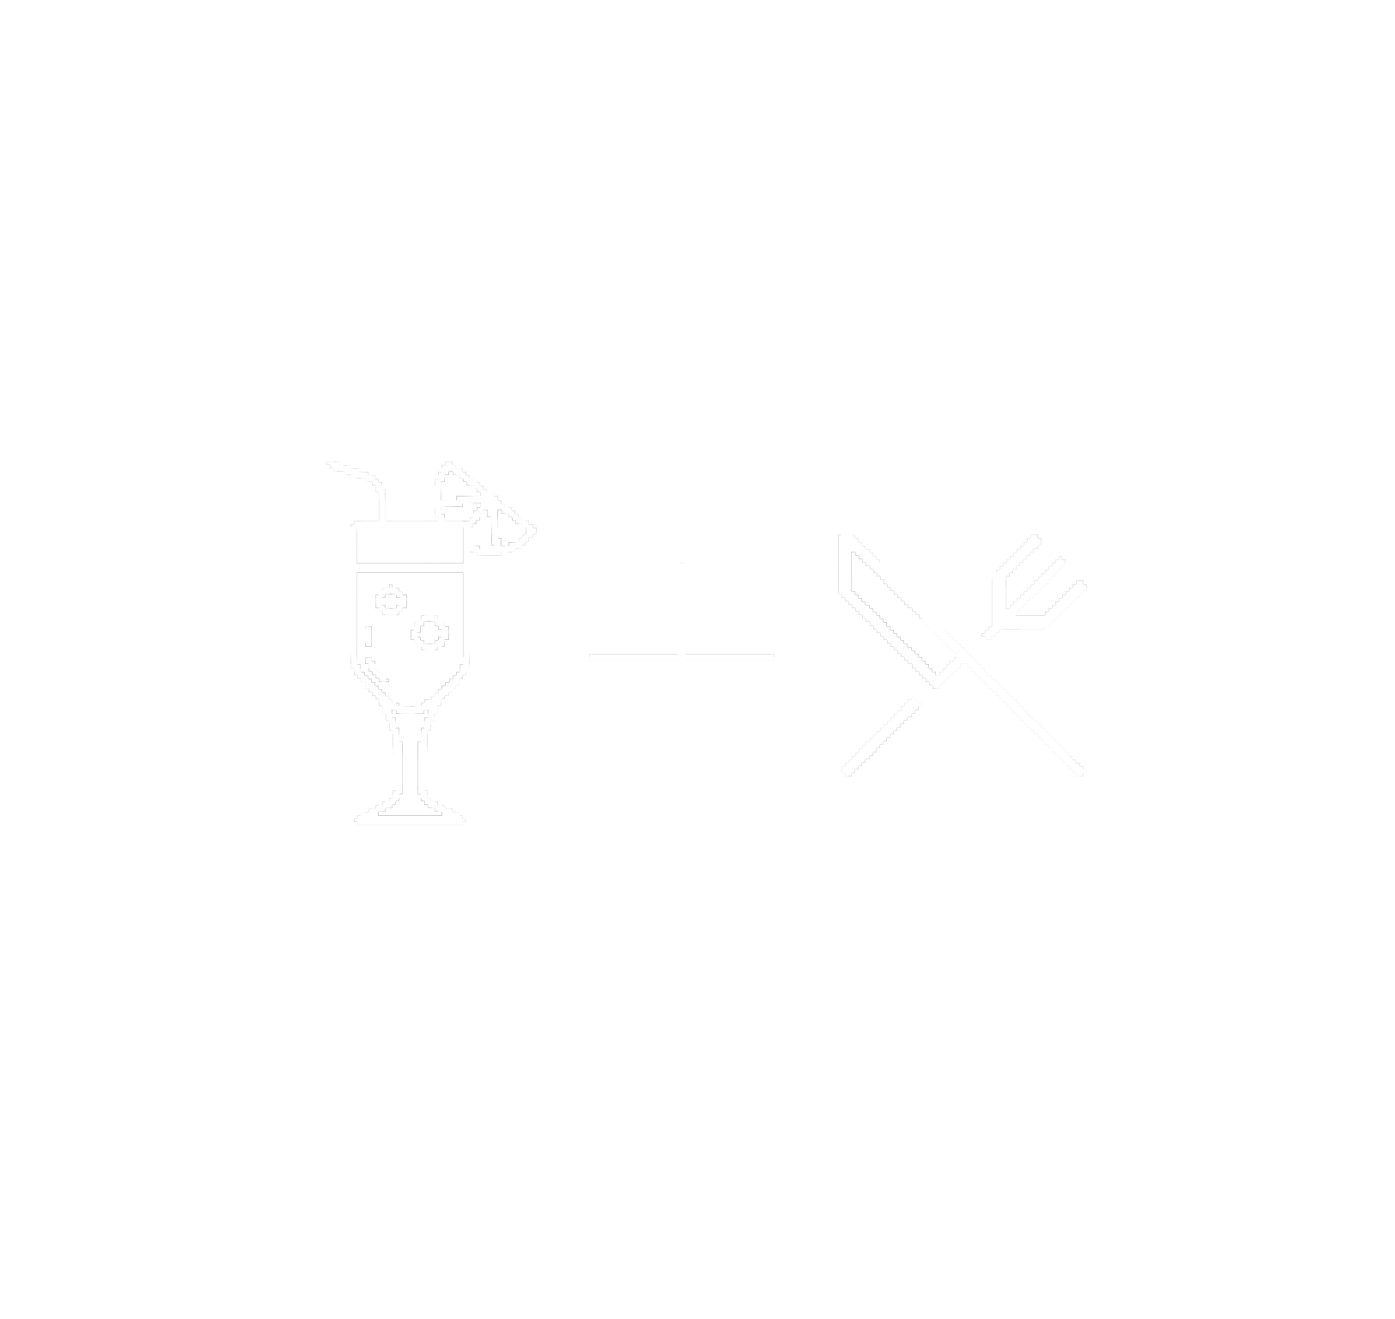 Saturday and Sunday 12pm - 3pm: $28 bottomless mimosas with food purchase